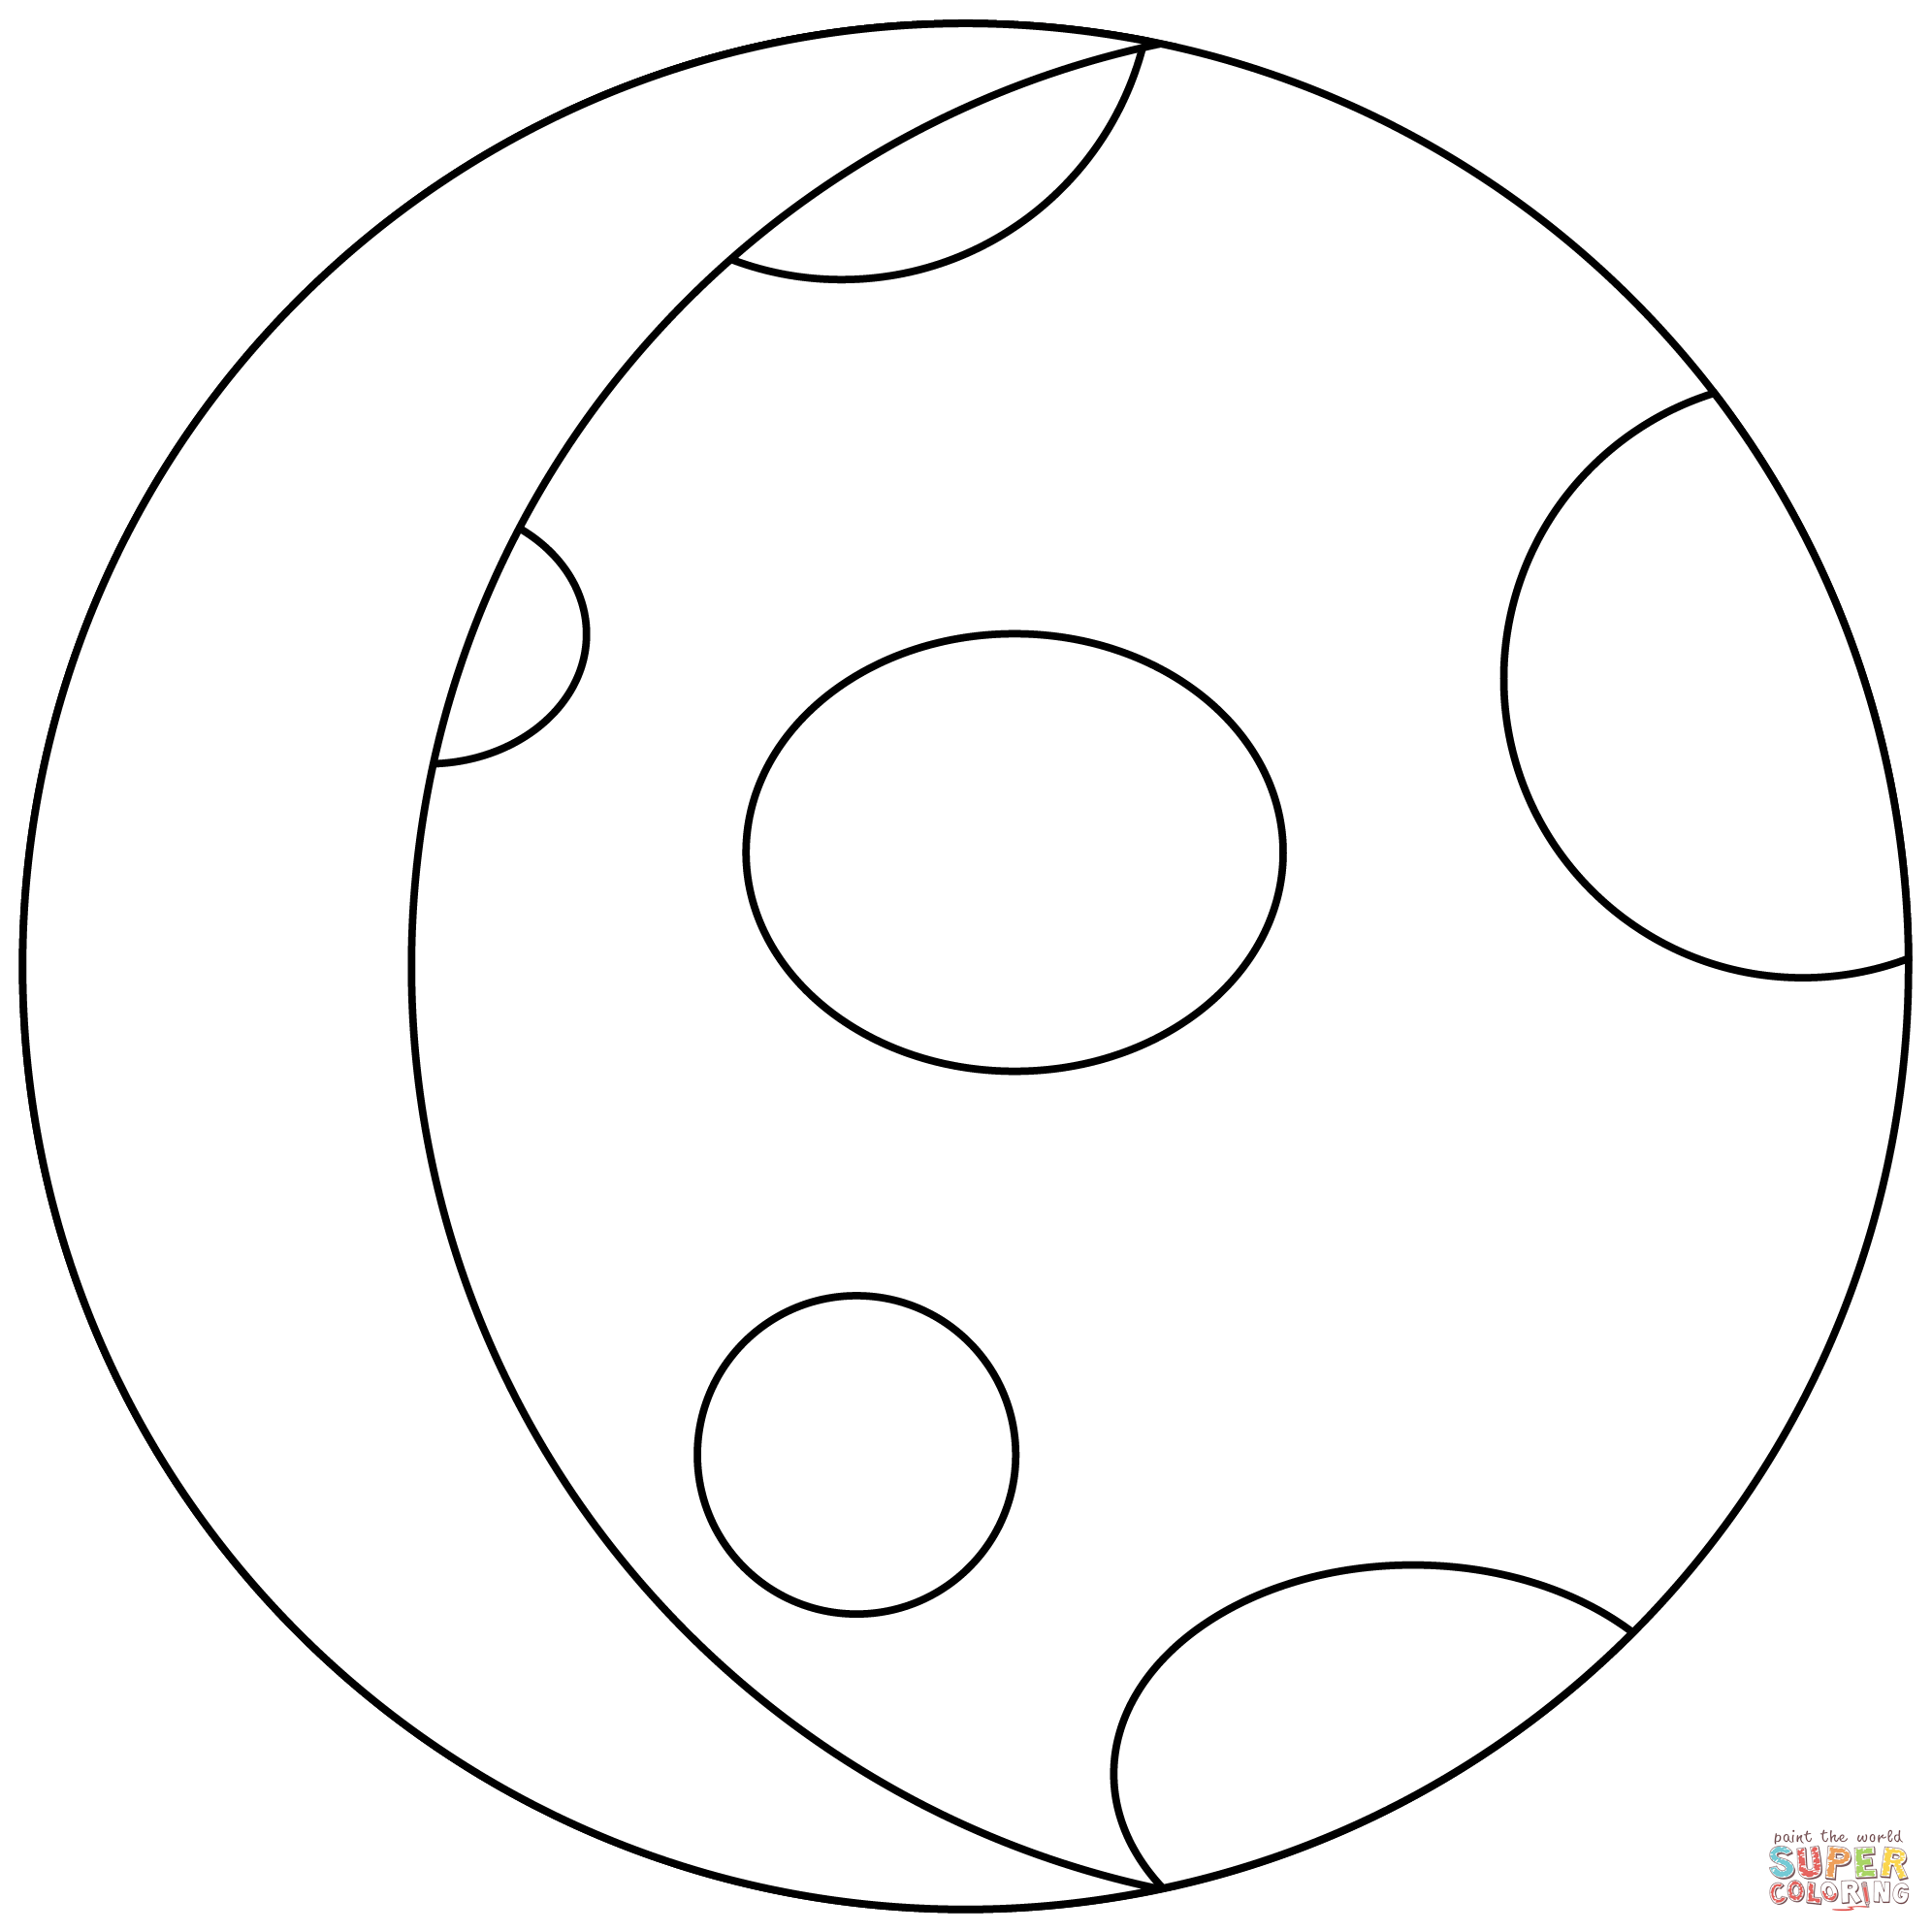 Waxing gibbous moon emoji coloring page free printable coloring pages